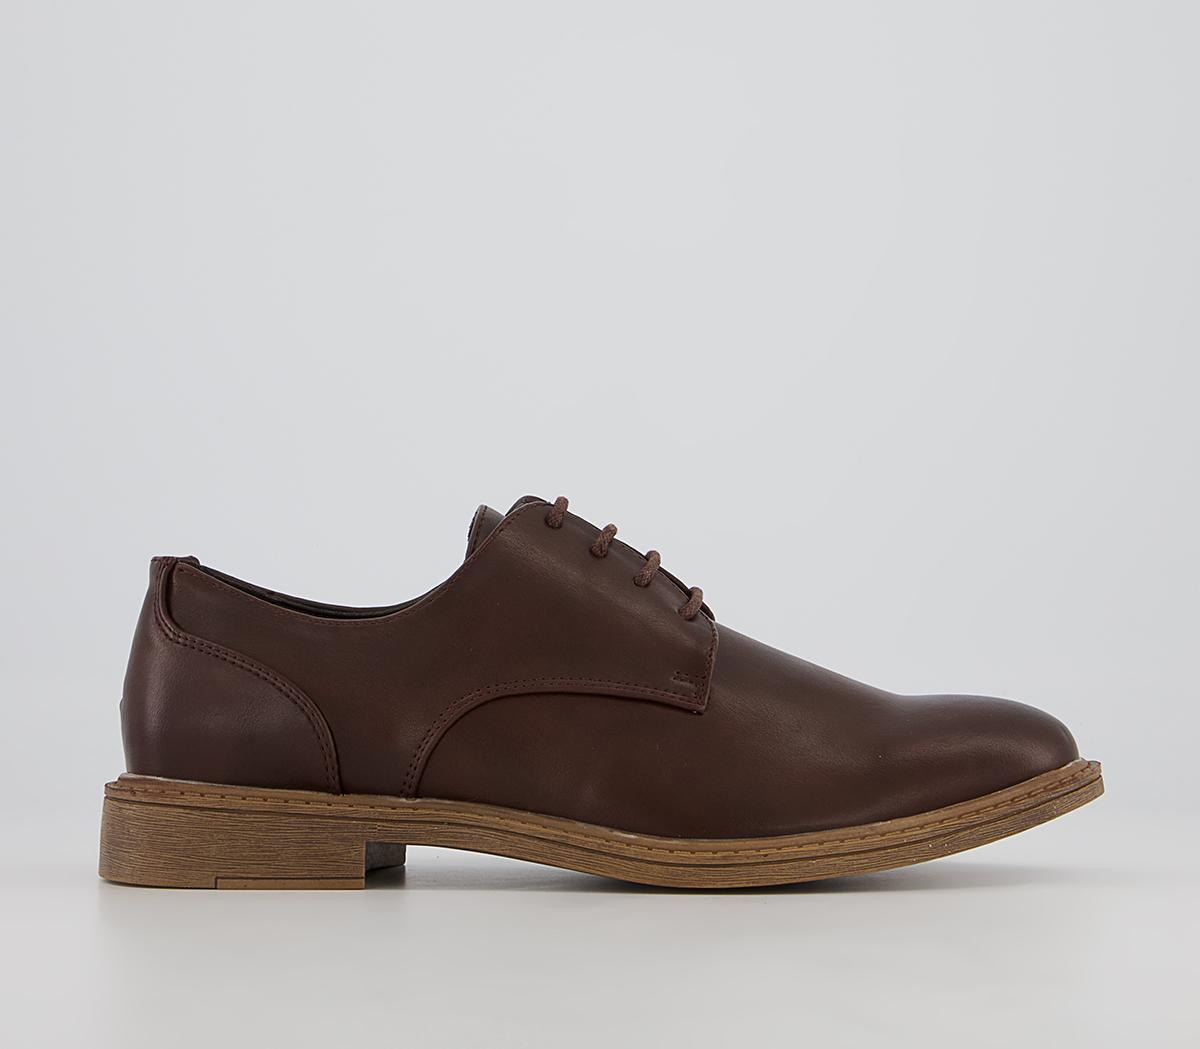 OFFICECarson Smart Casual Derby ShoesMid Brown